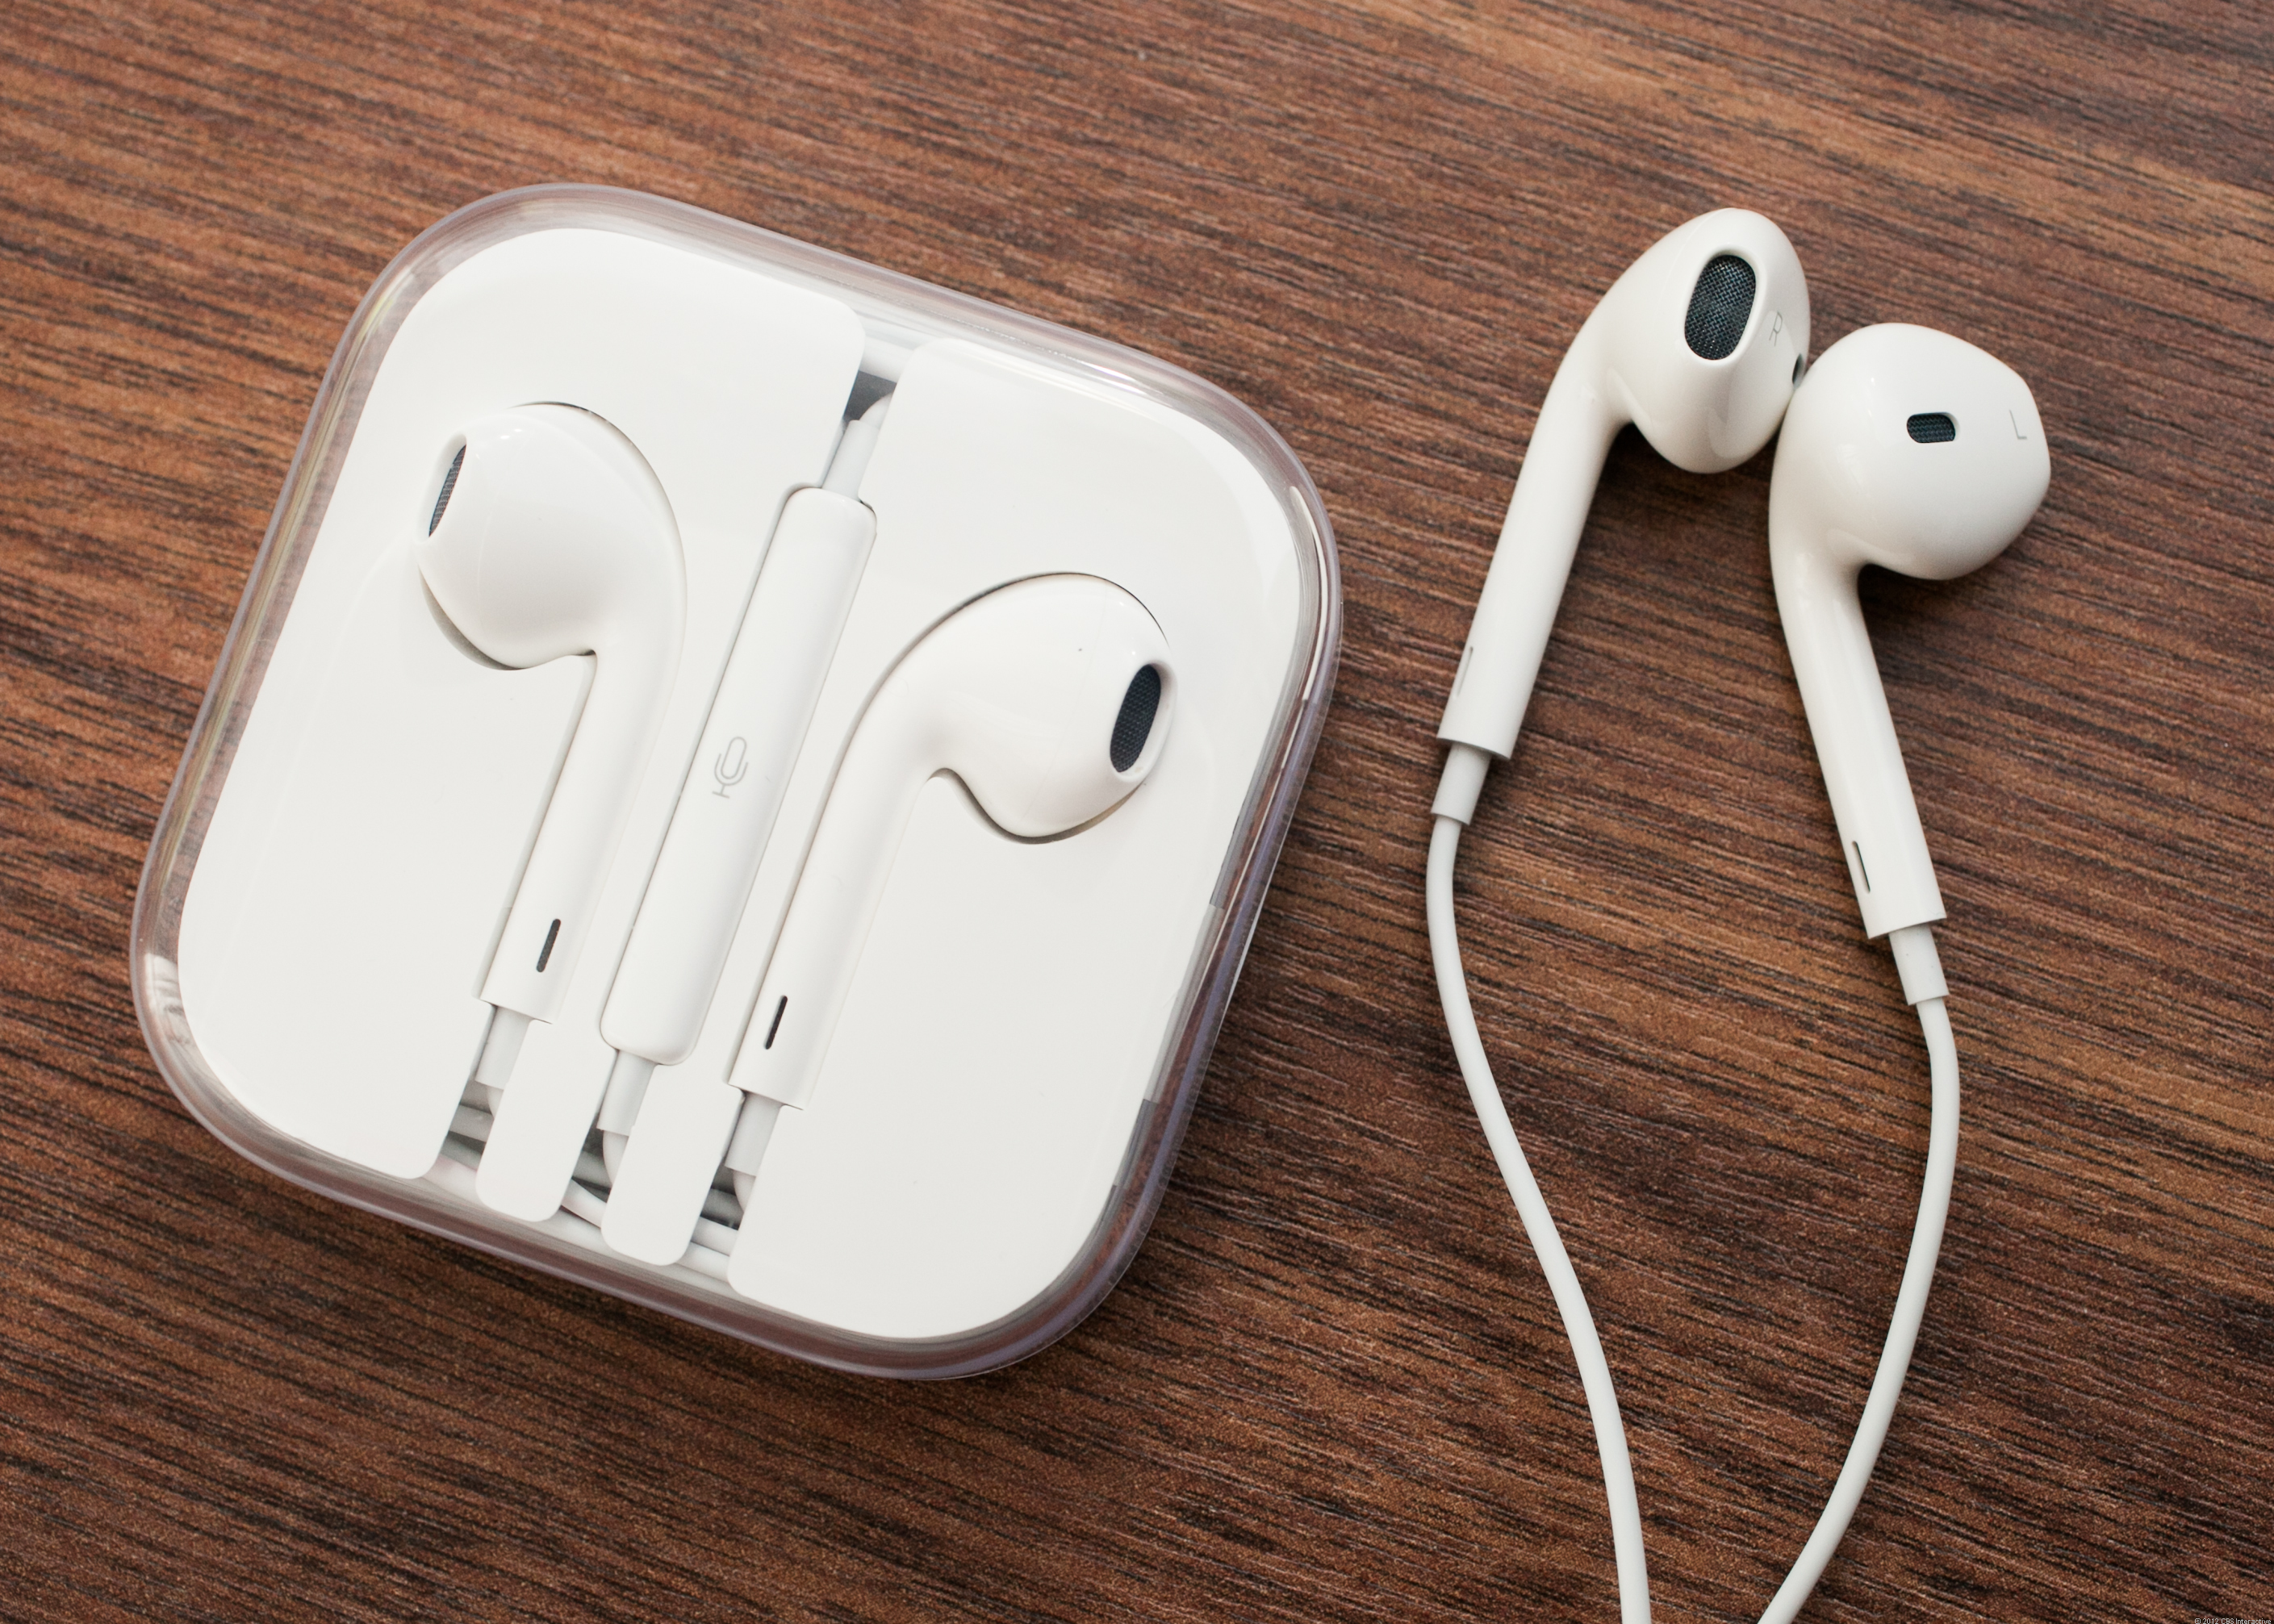 Apple ships mic-less EarPods with new iPod Touch - CNET